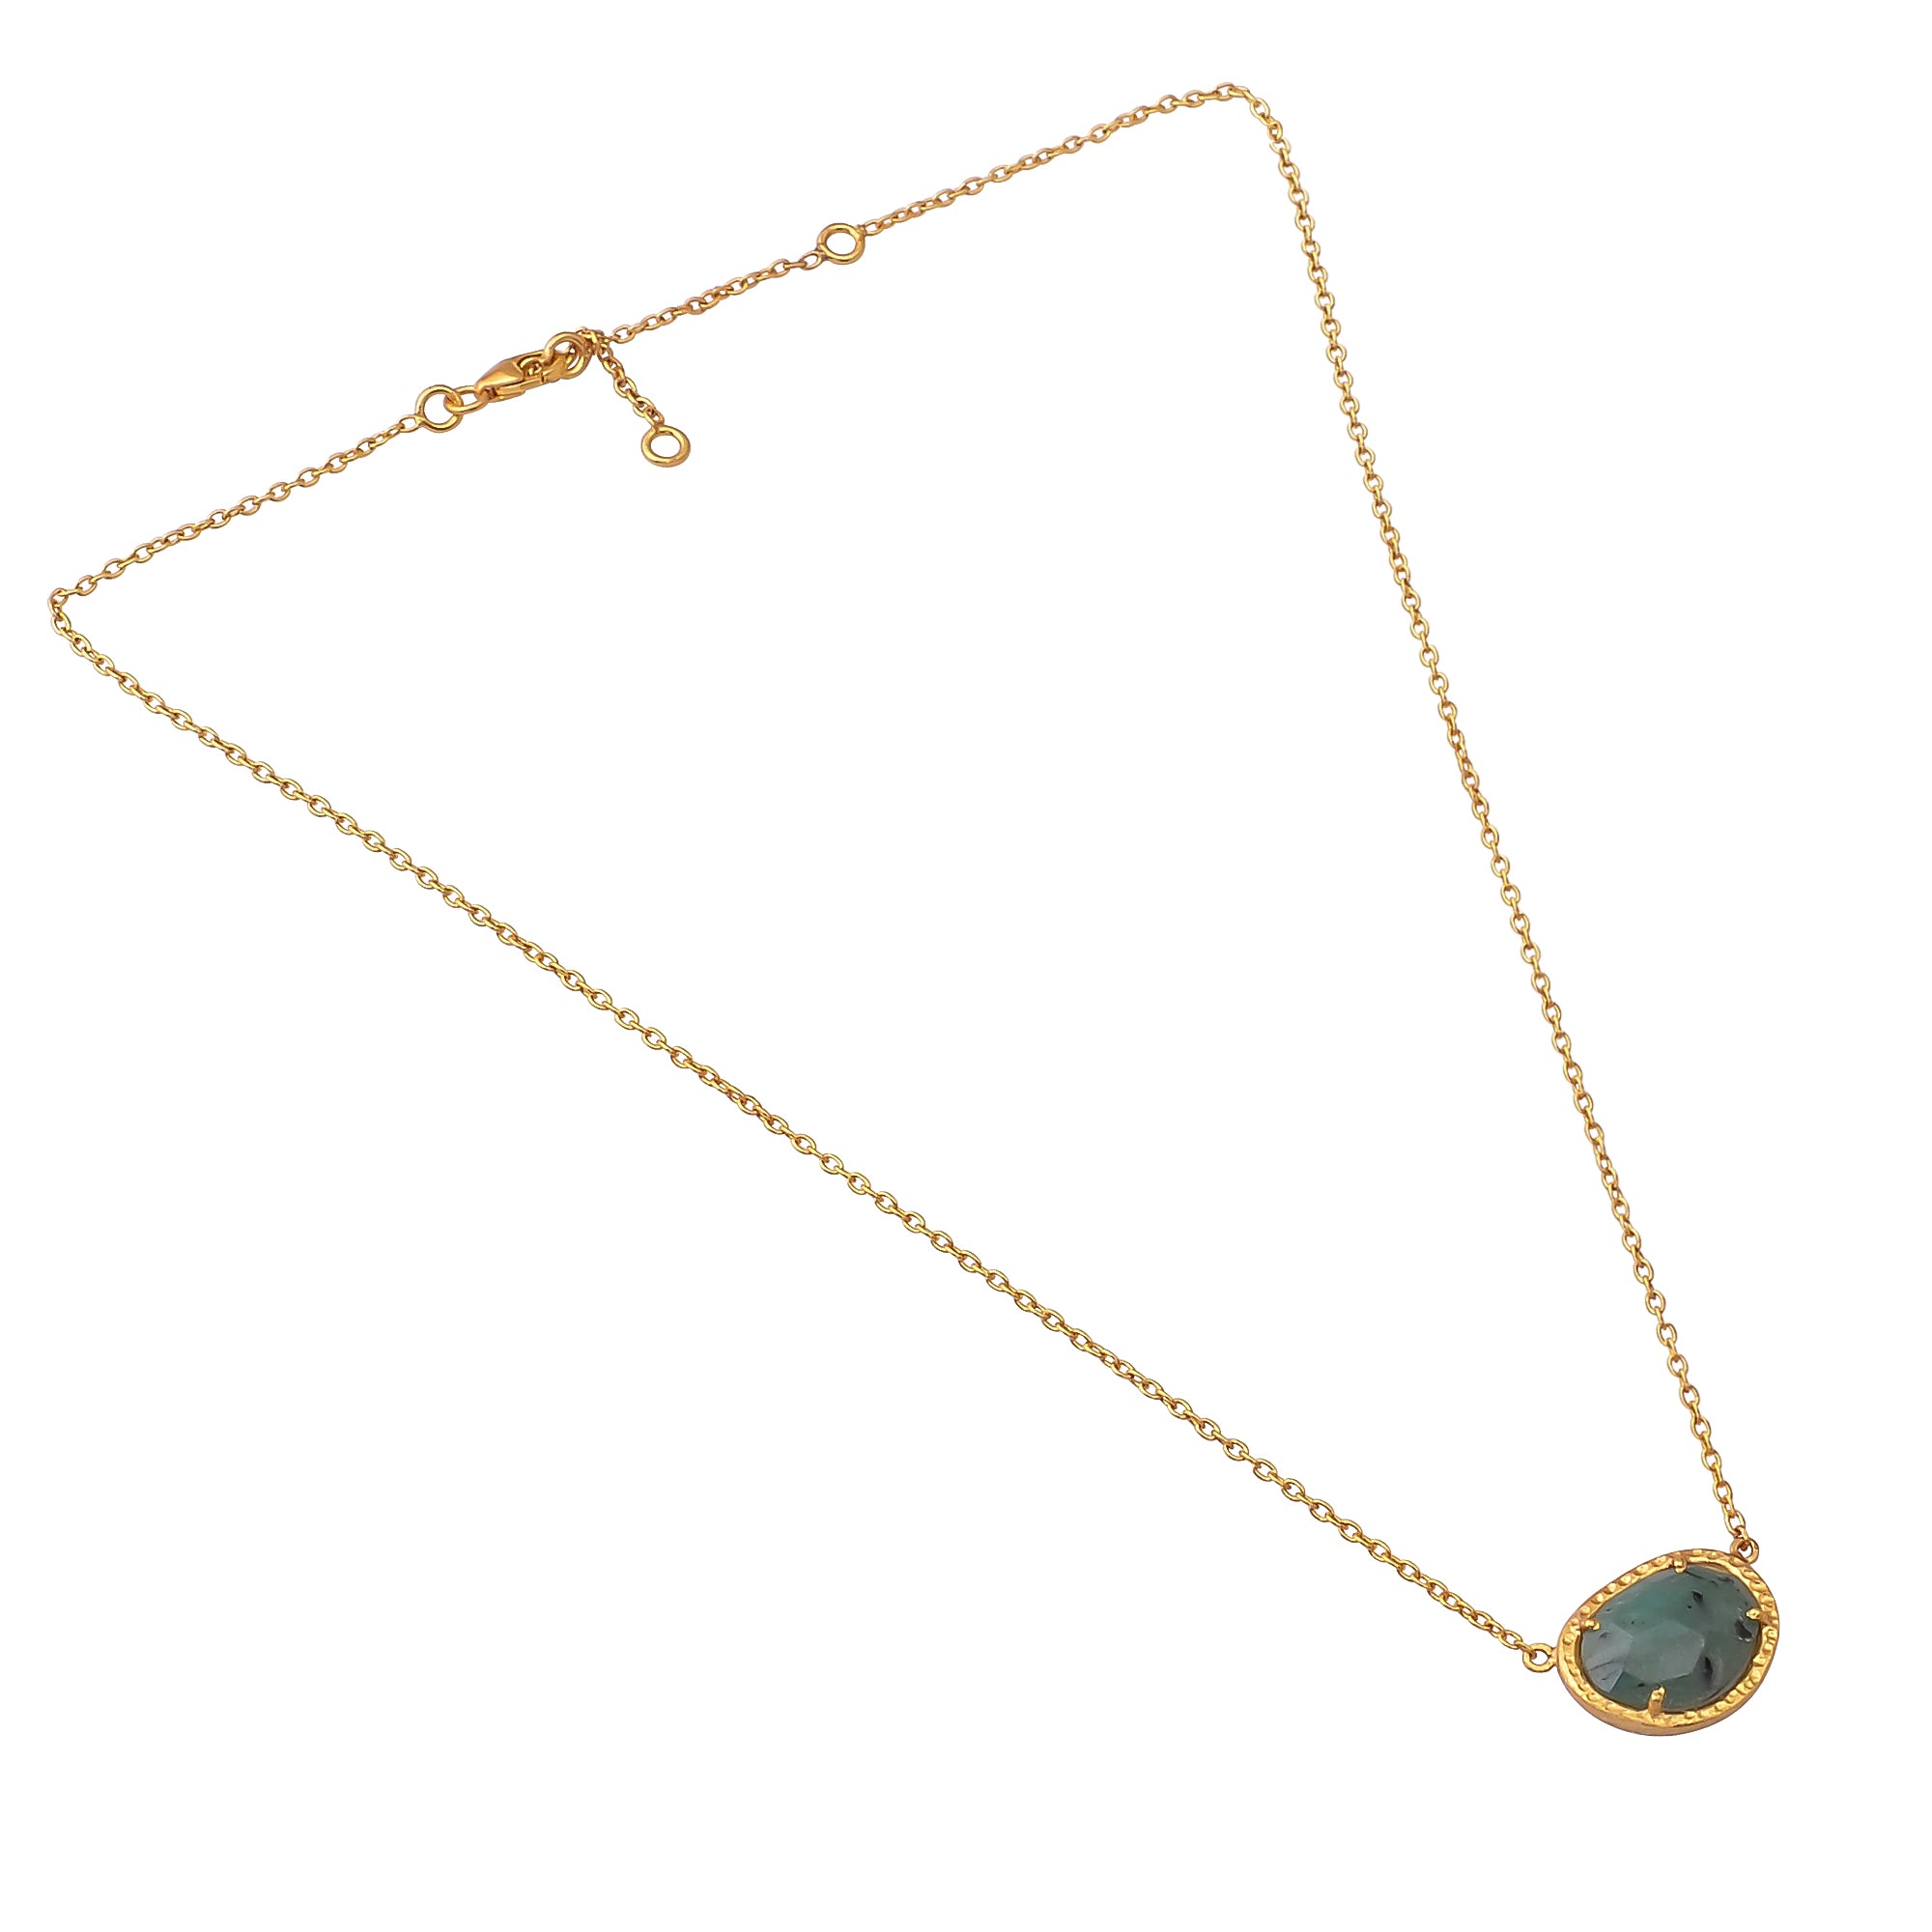 Buy Handcrafted Silver Gold Plated Emerald Necklace